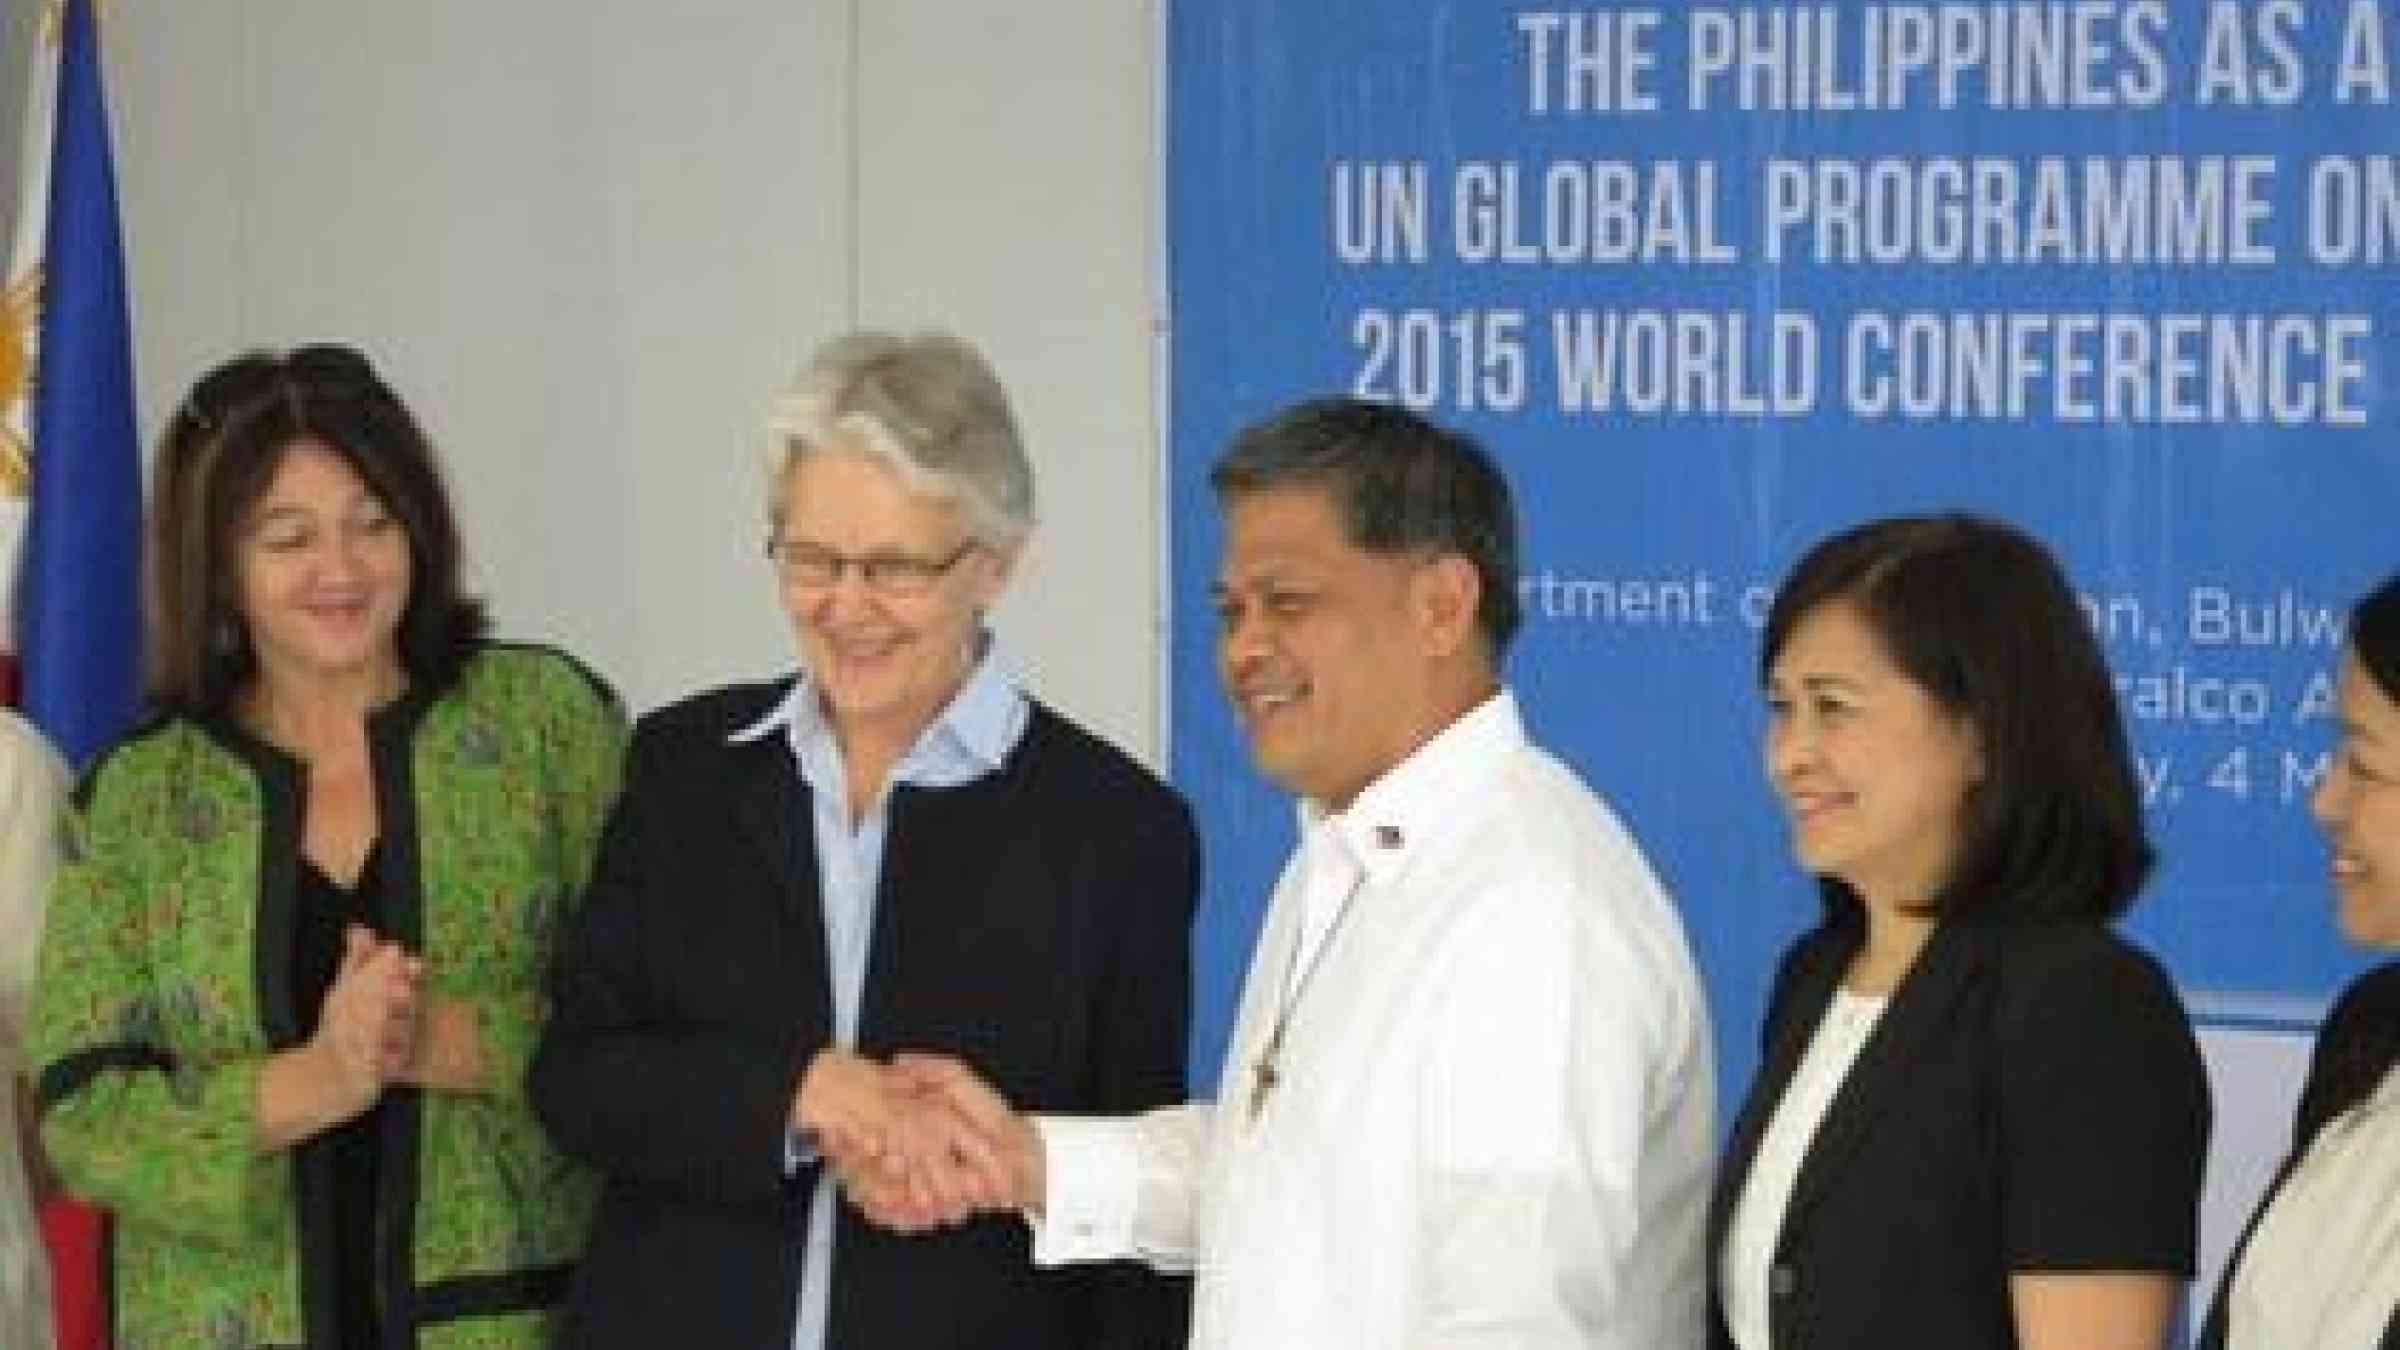 UNISDR head, Margareta Wahlström, with the Secretary of the Philippines' Department of Education, Armin Luistro, at today's launch.